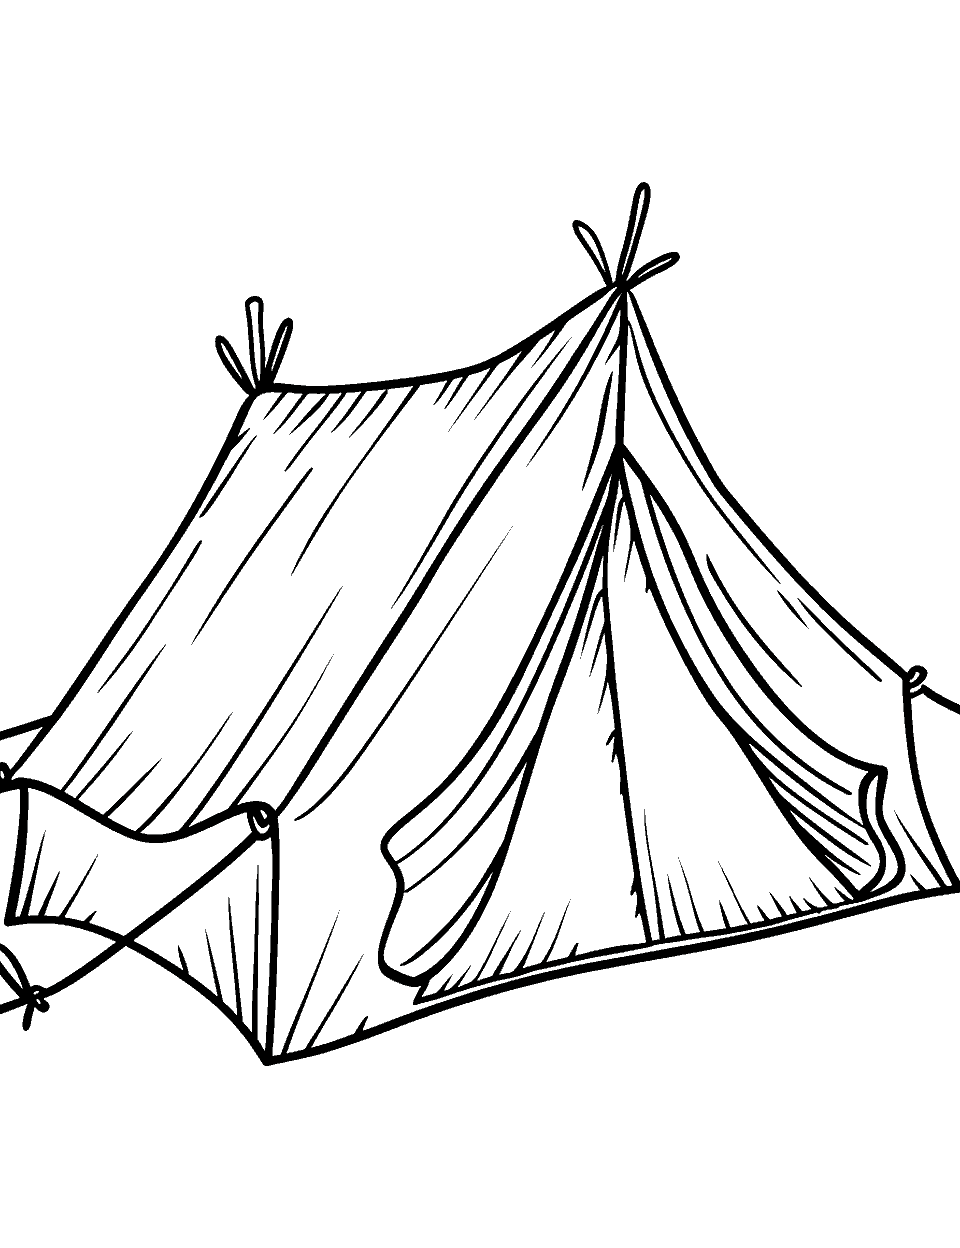 Camping Tent Coloring Page - A tent raised fully ready for camping.